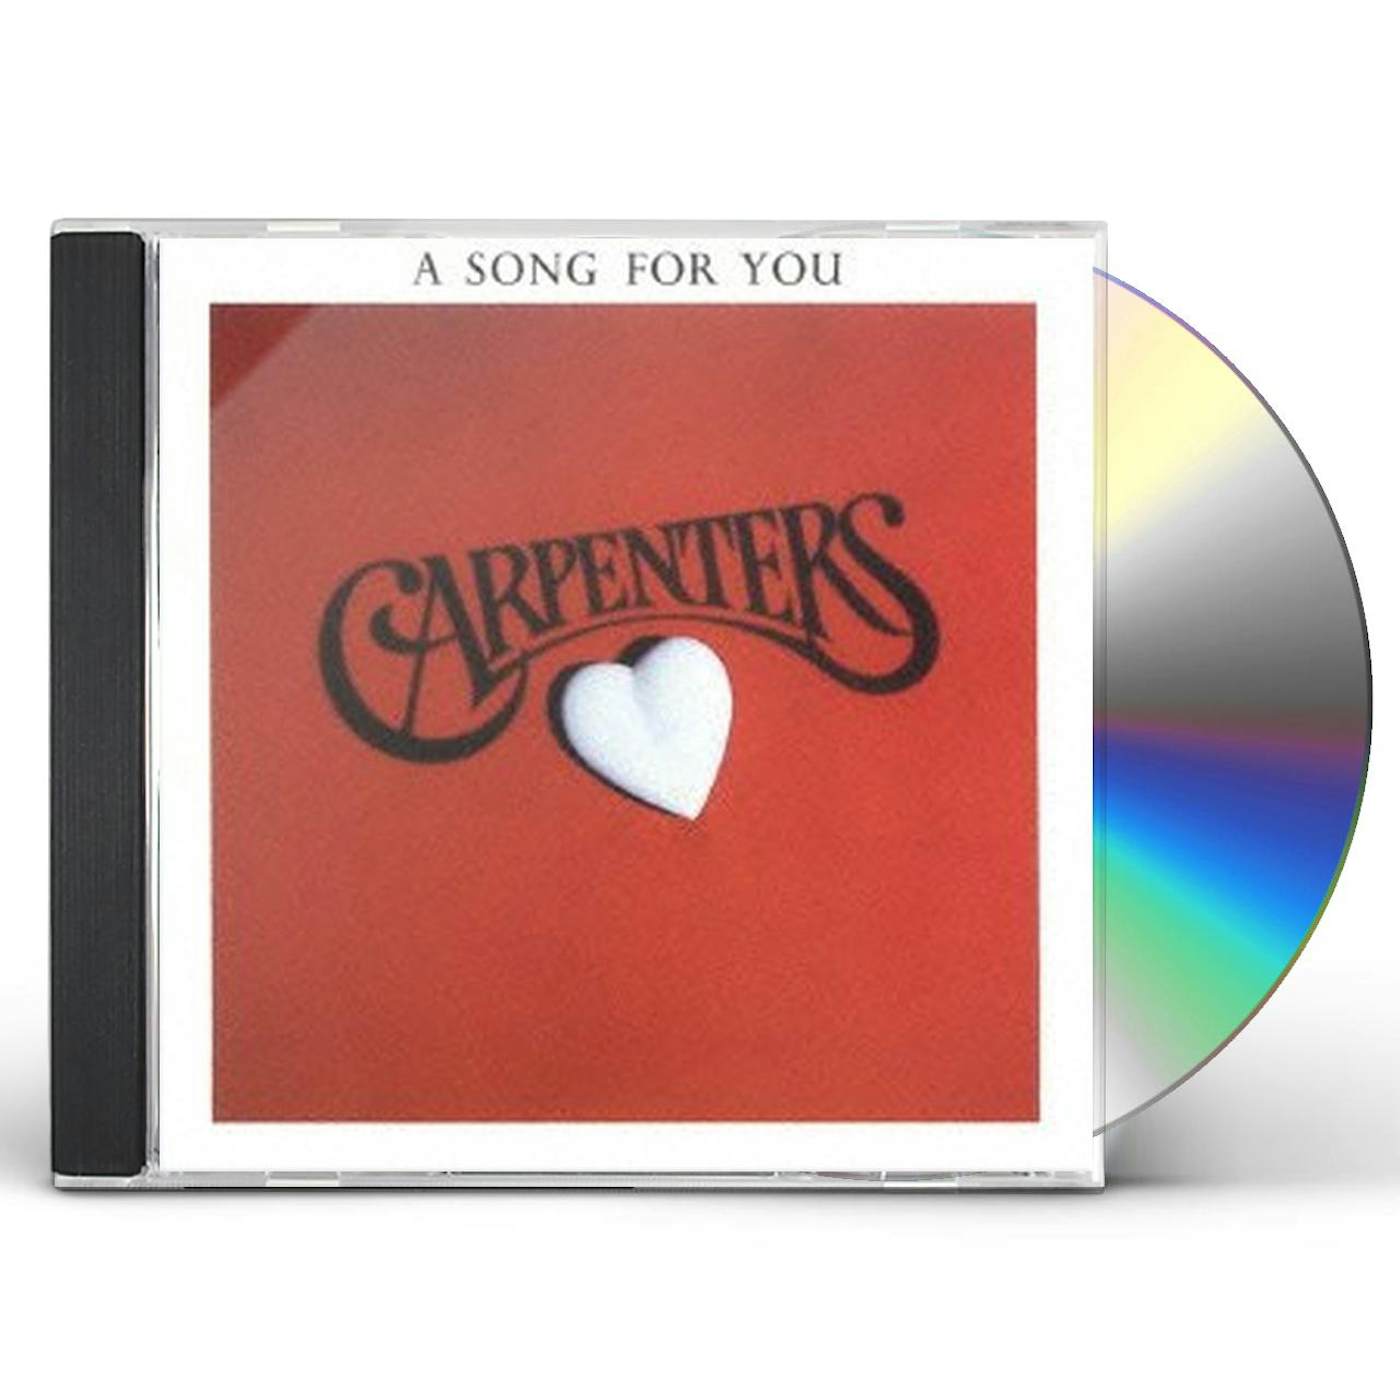 Carpenters SONG FOR YOU CD